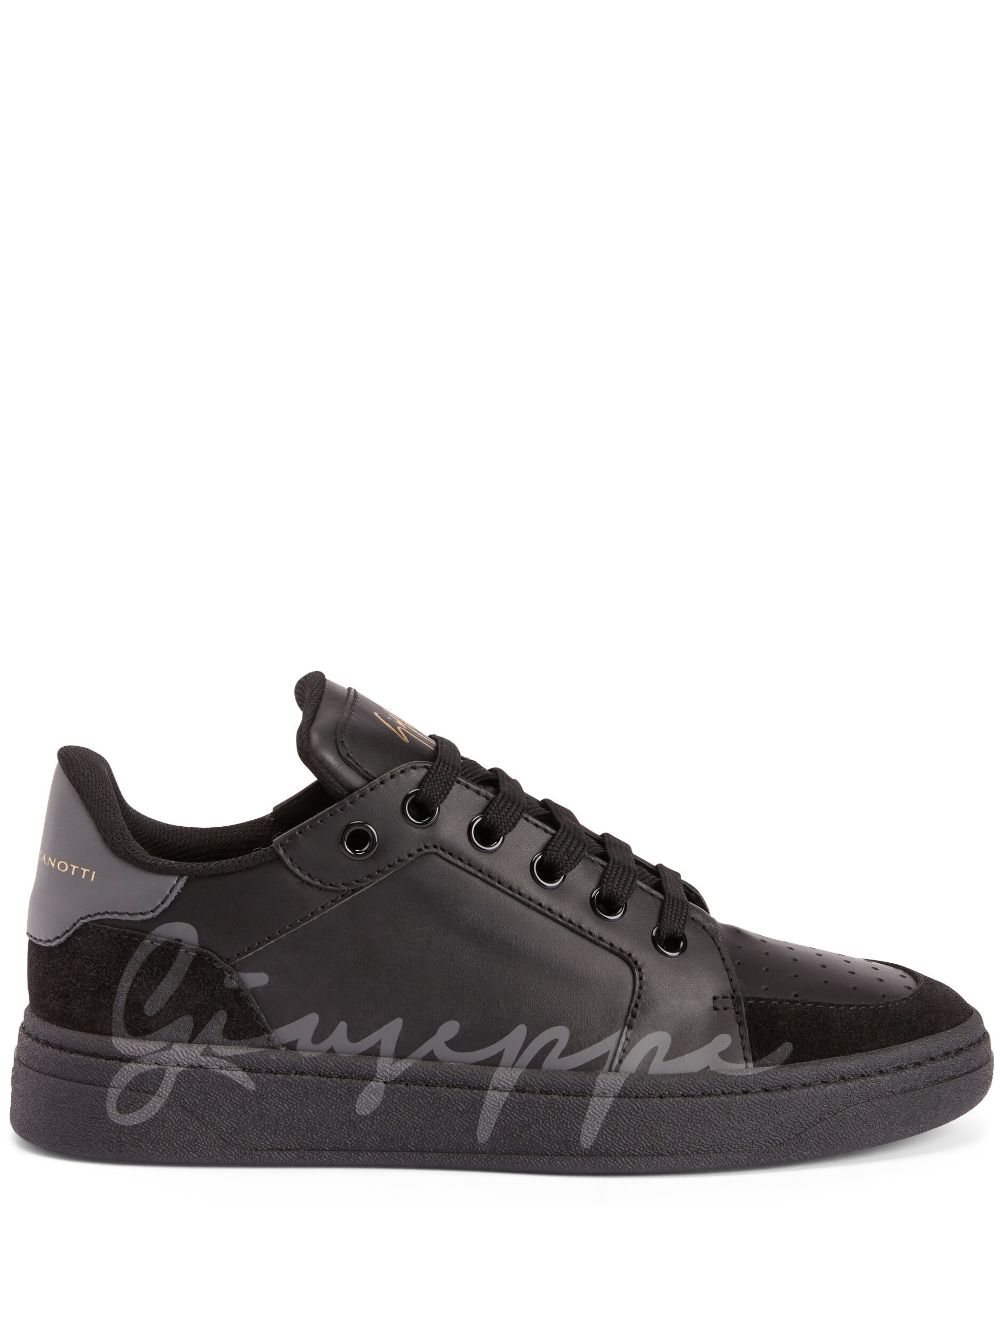 GZ94 lace-up sneakers